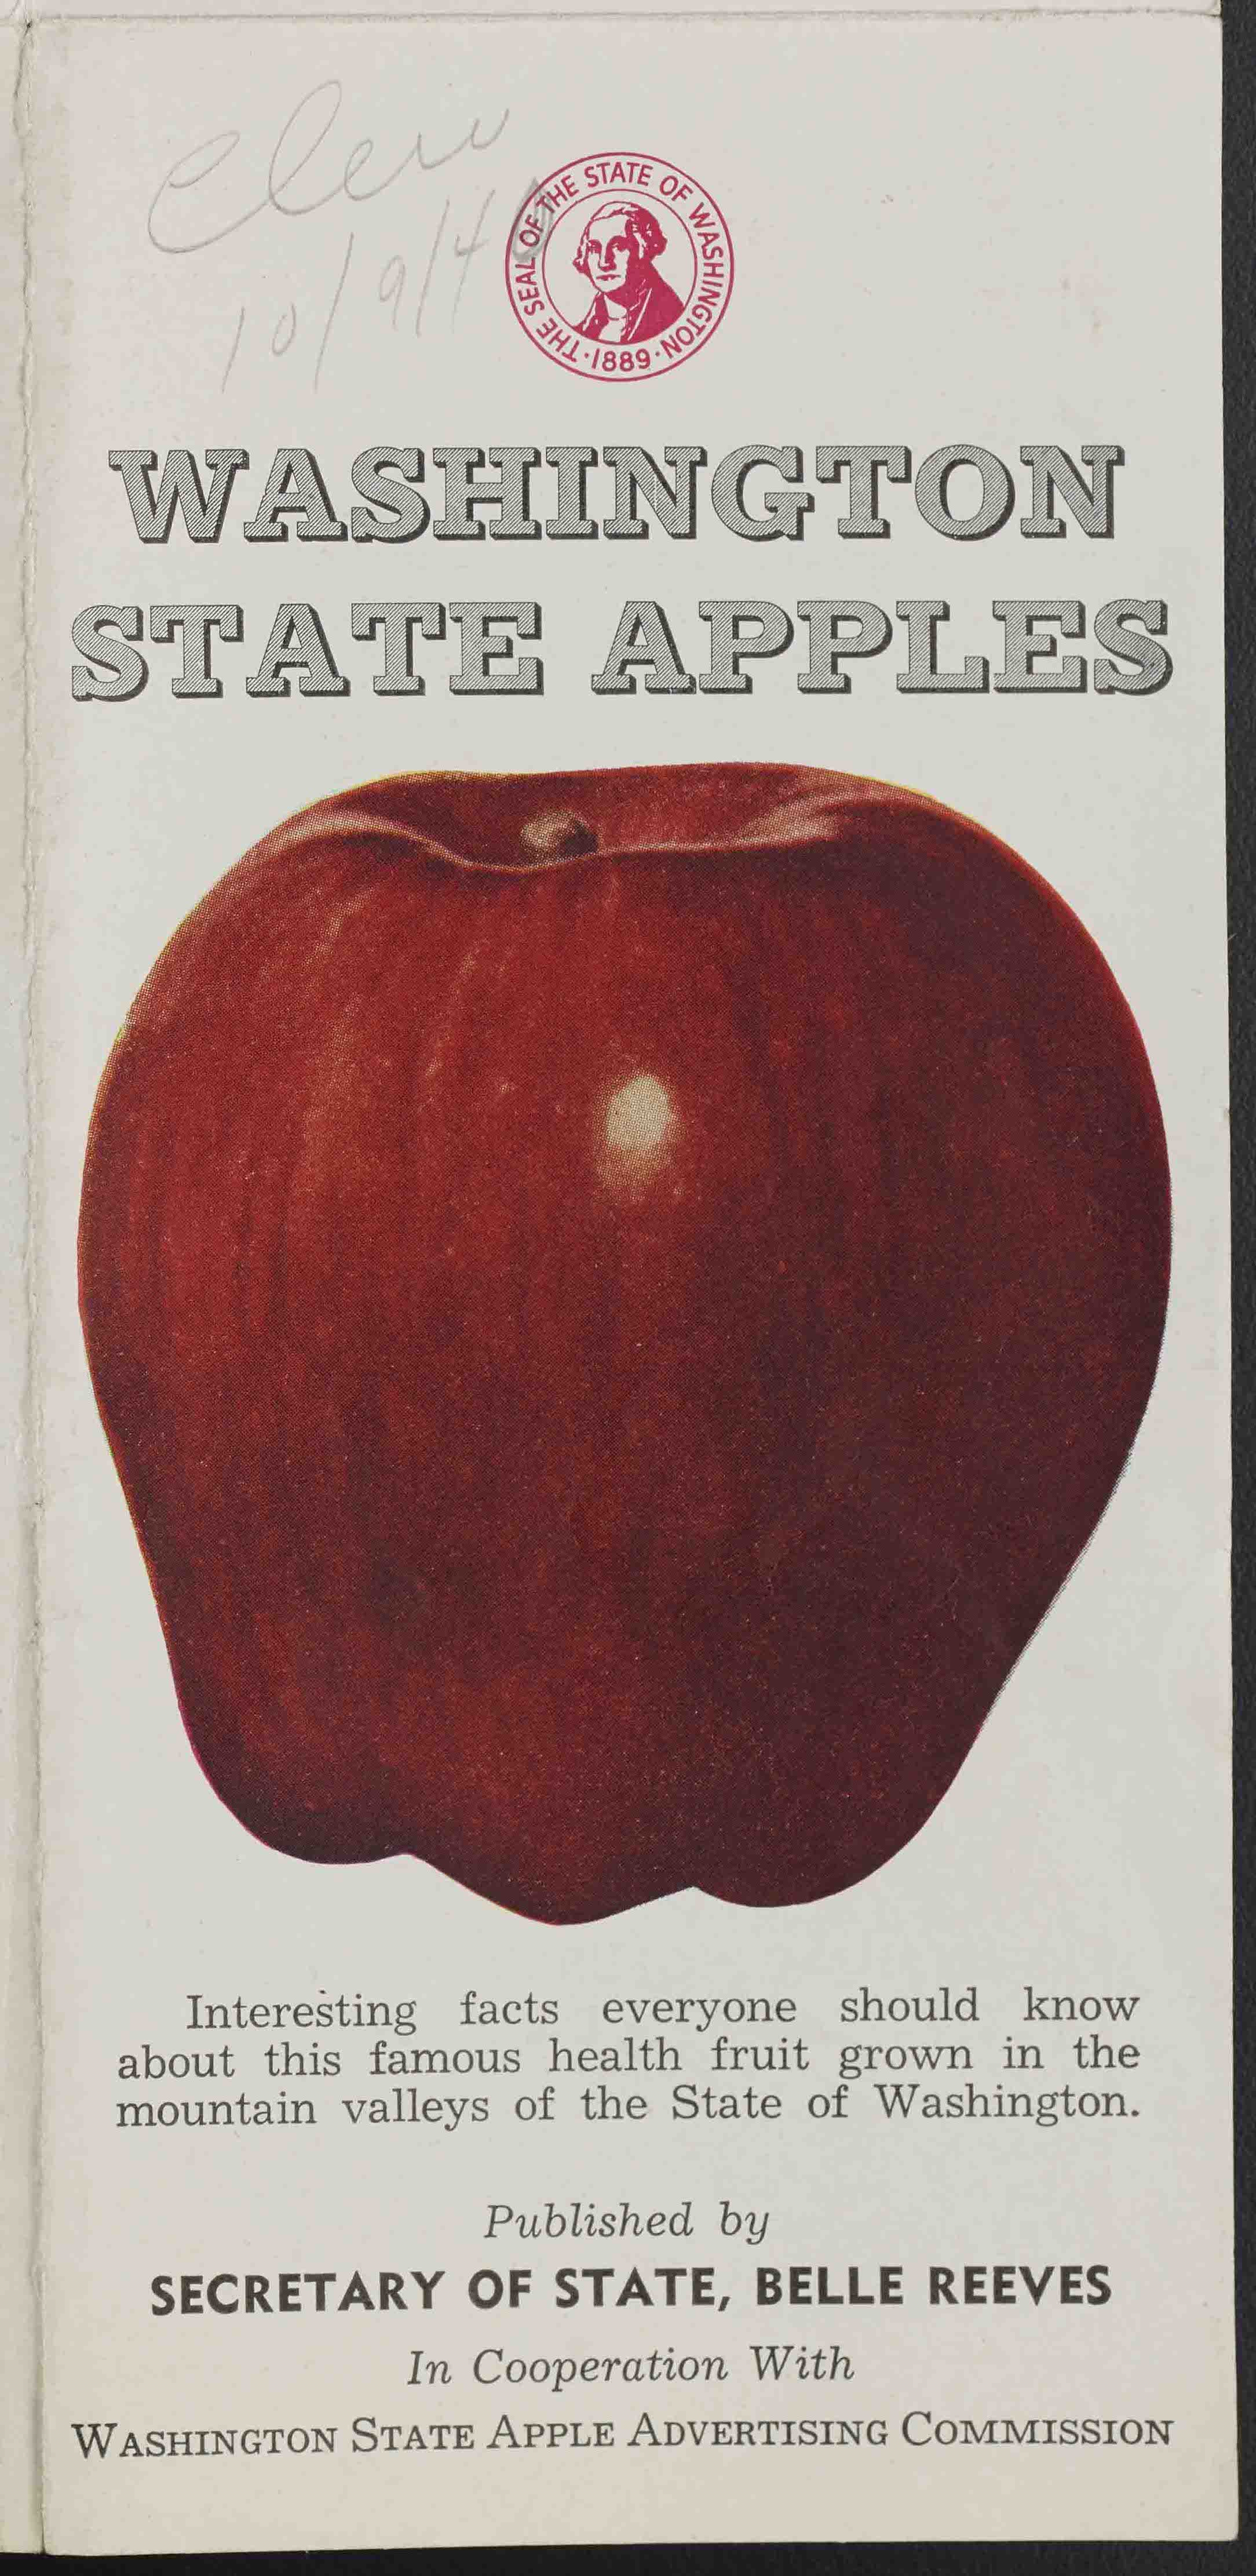 Washington State Apples, Secretary of State, Belle Reeves